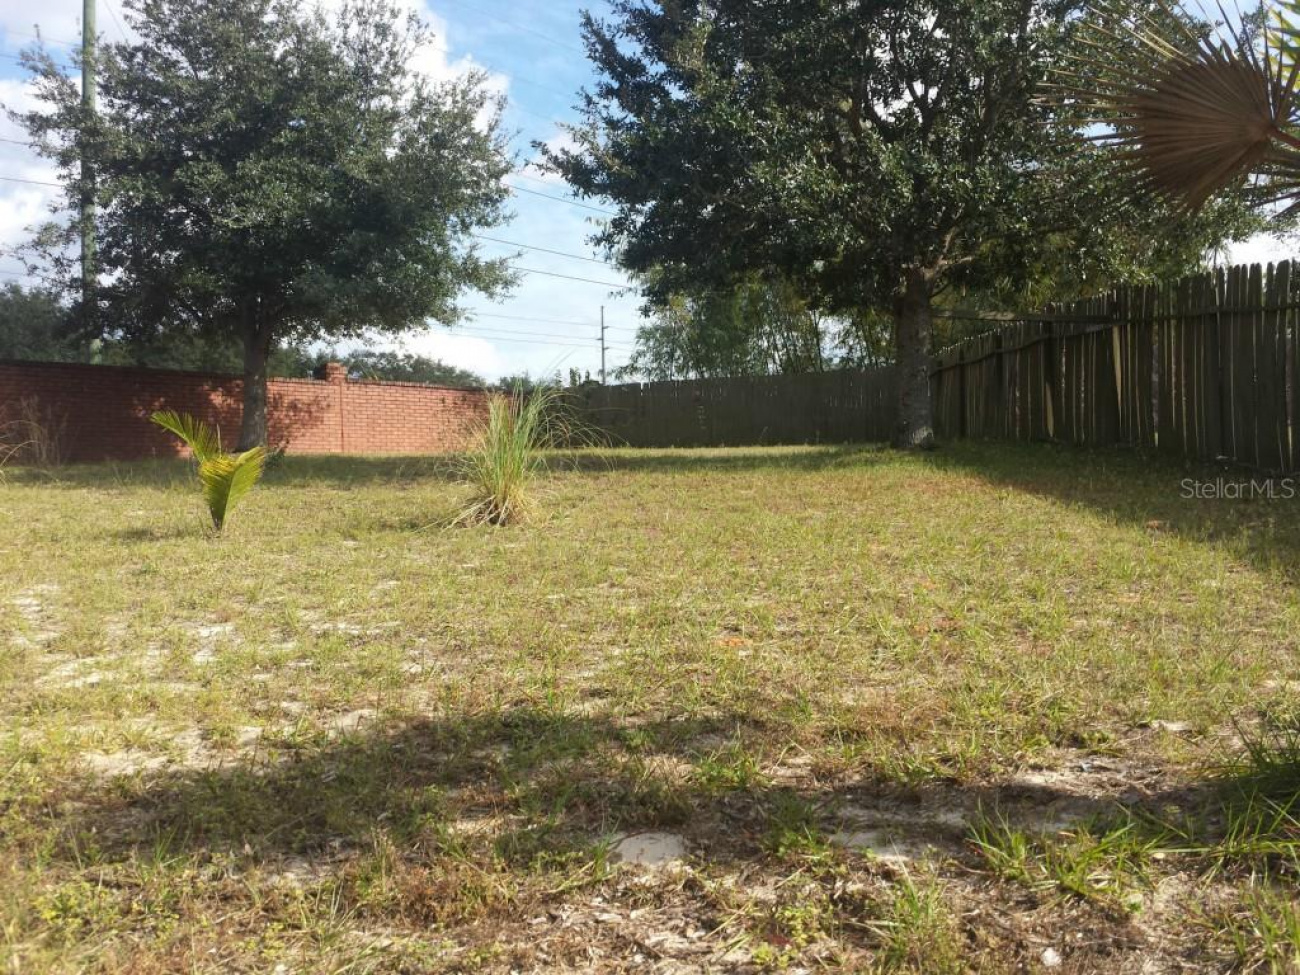 Few properties located in residential communities enjoy such a large lot. Imagine what the kids and pets can do when they have this much fenced back yard to work with. If you are a gardener, this is paradise.